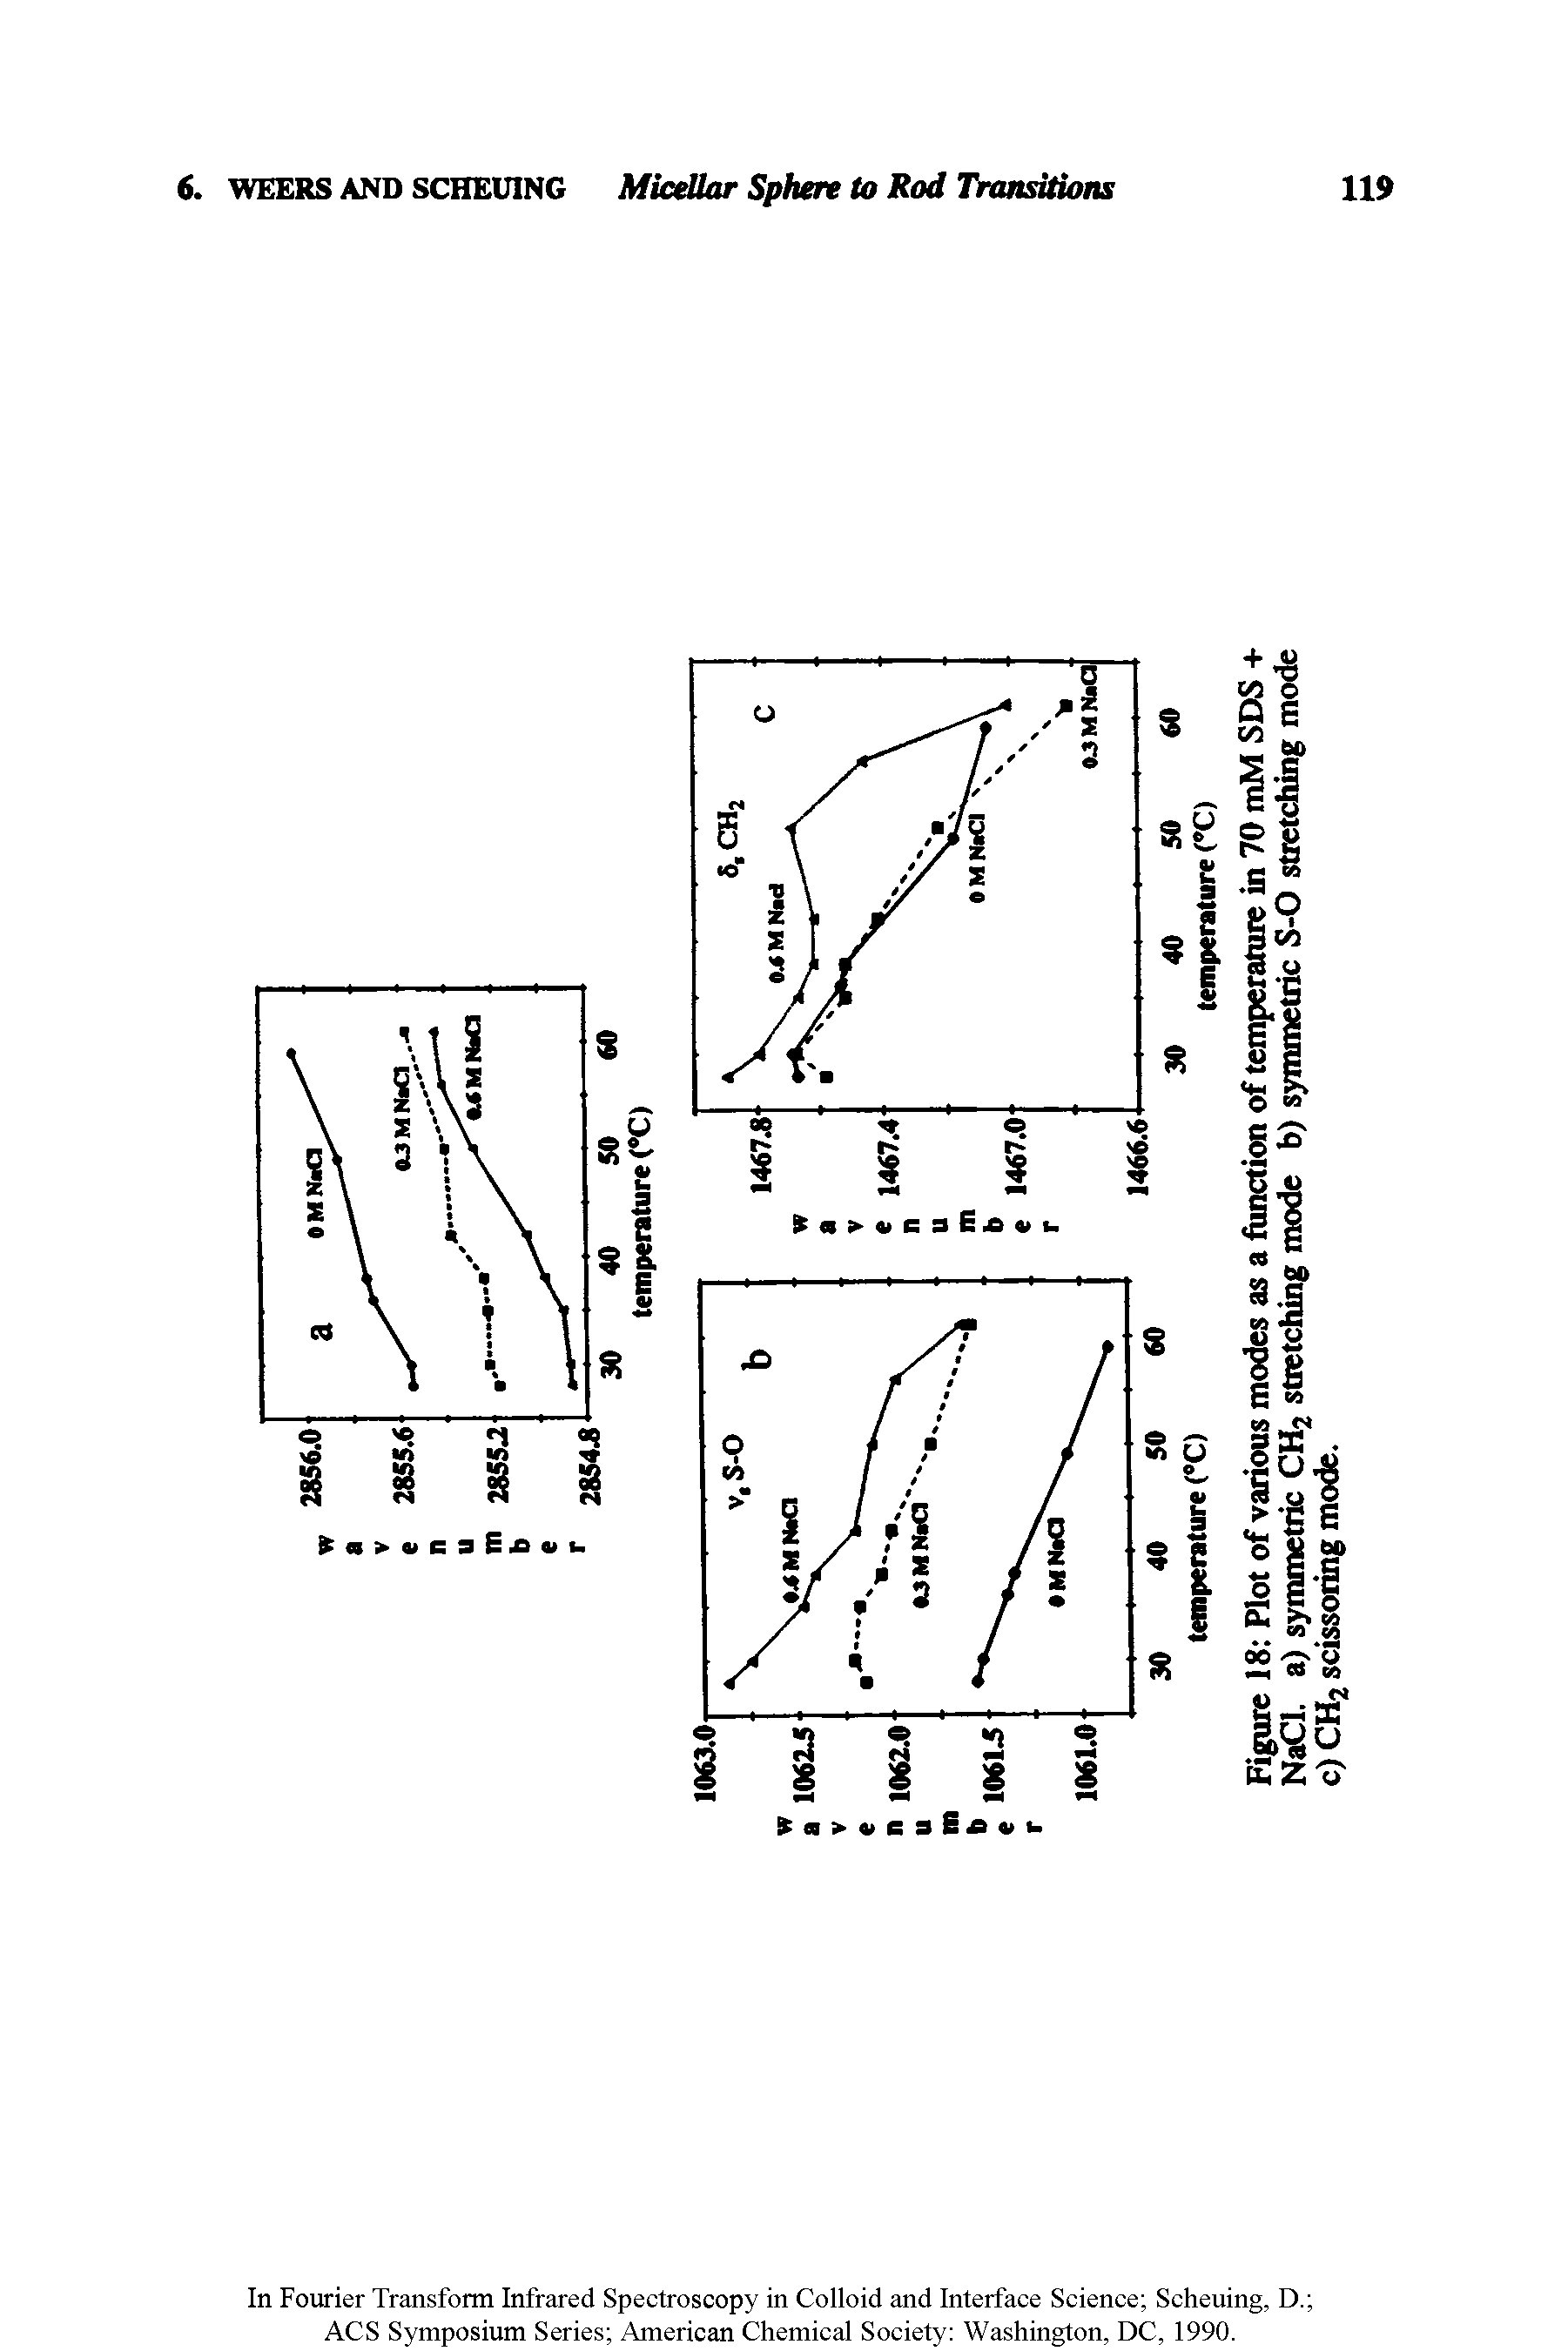 Figure 18 Plot of various modes as a function of temperature in 70 mM SDS + NaCl. a) symmetric CH2 stretching mode b) symmetric S-0 stretching mode c) CH2 scissoring mode.